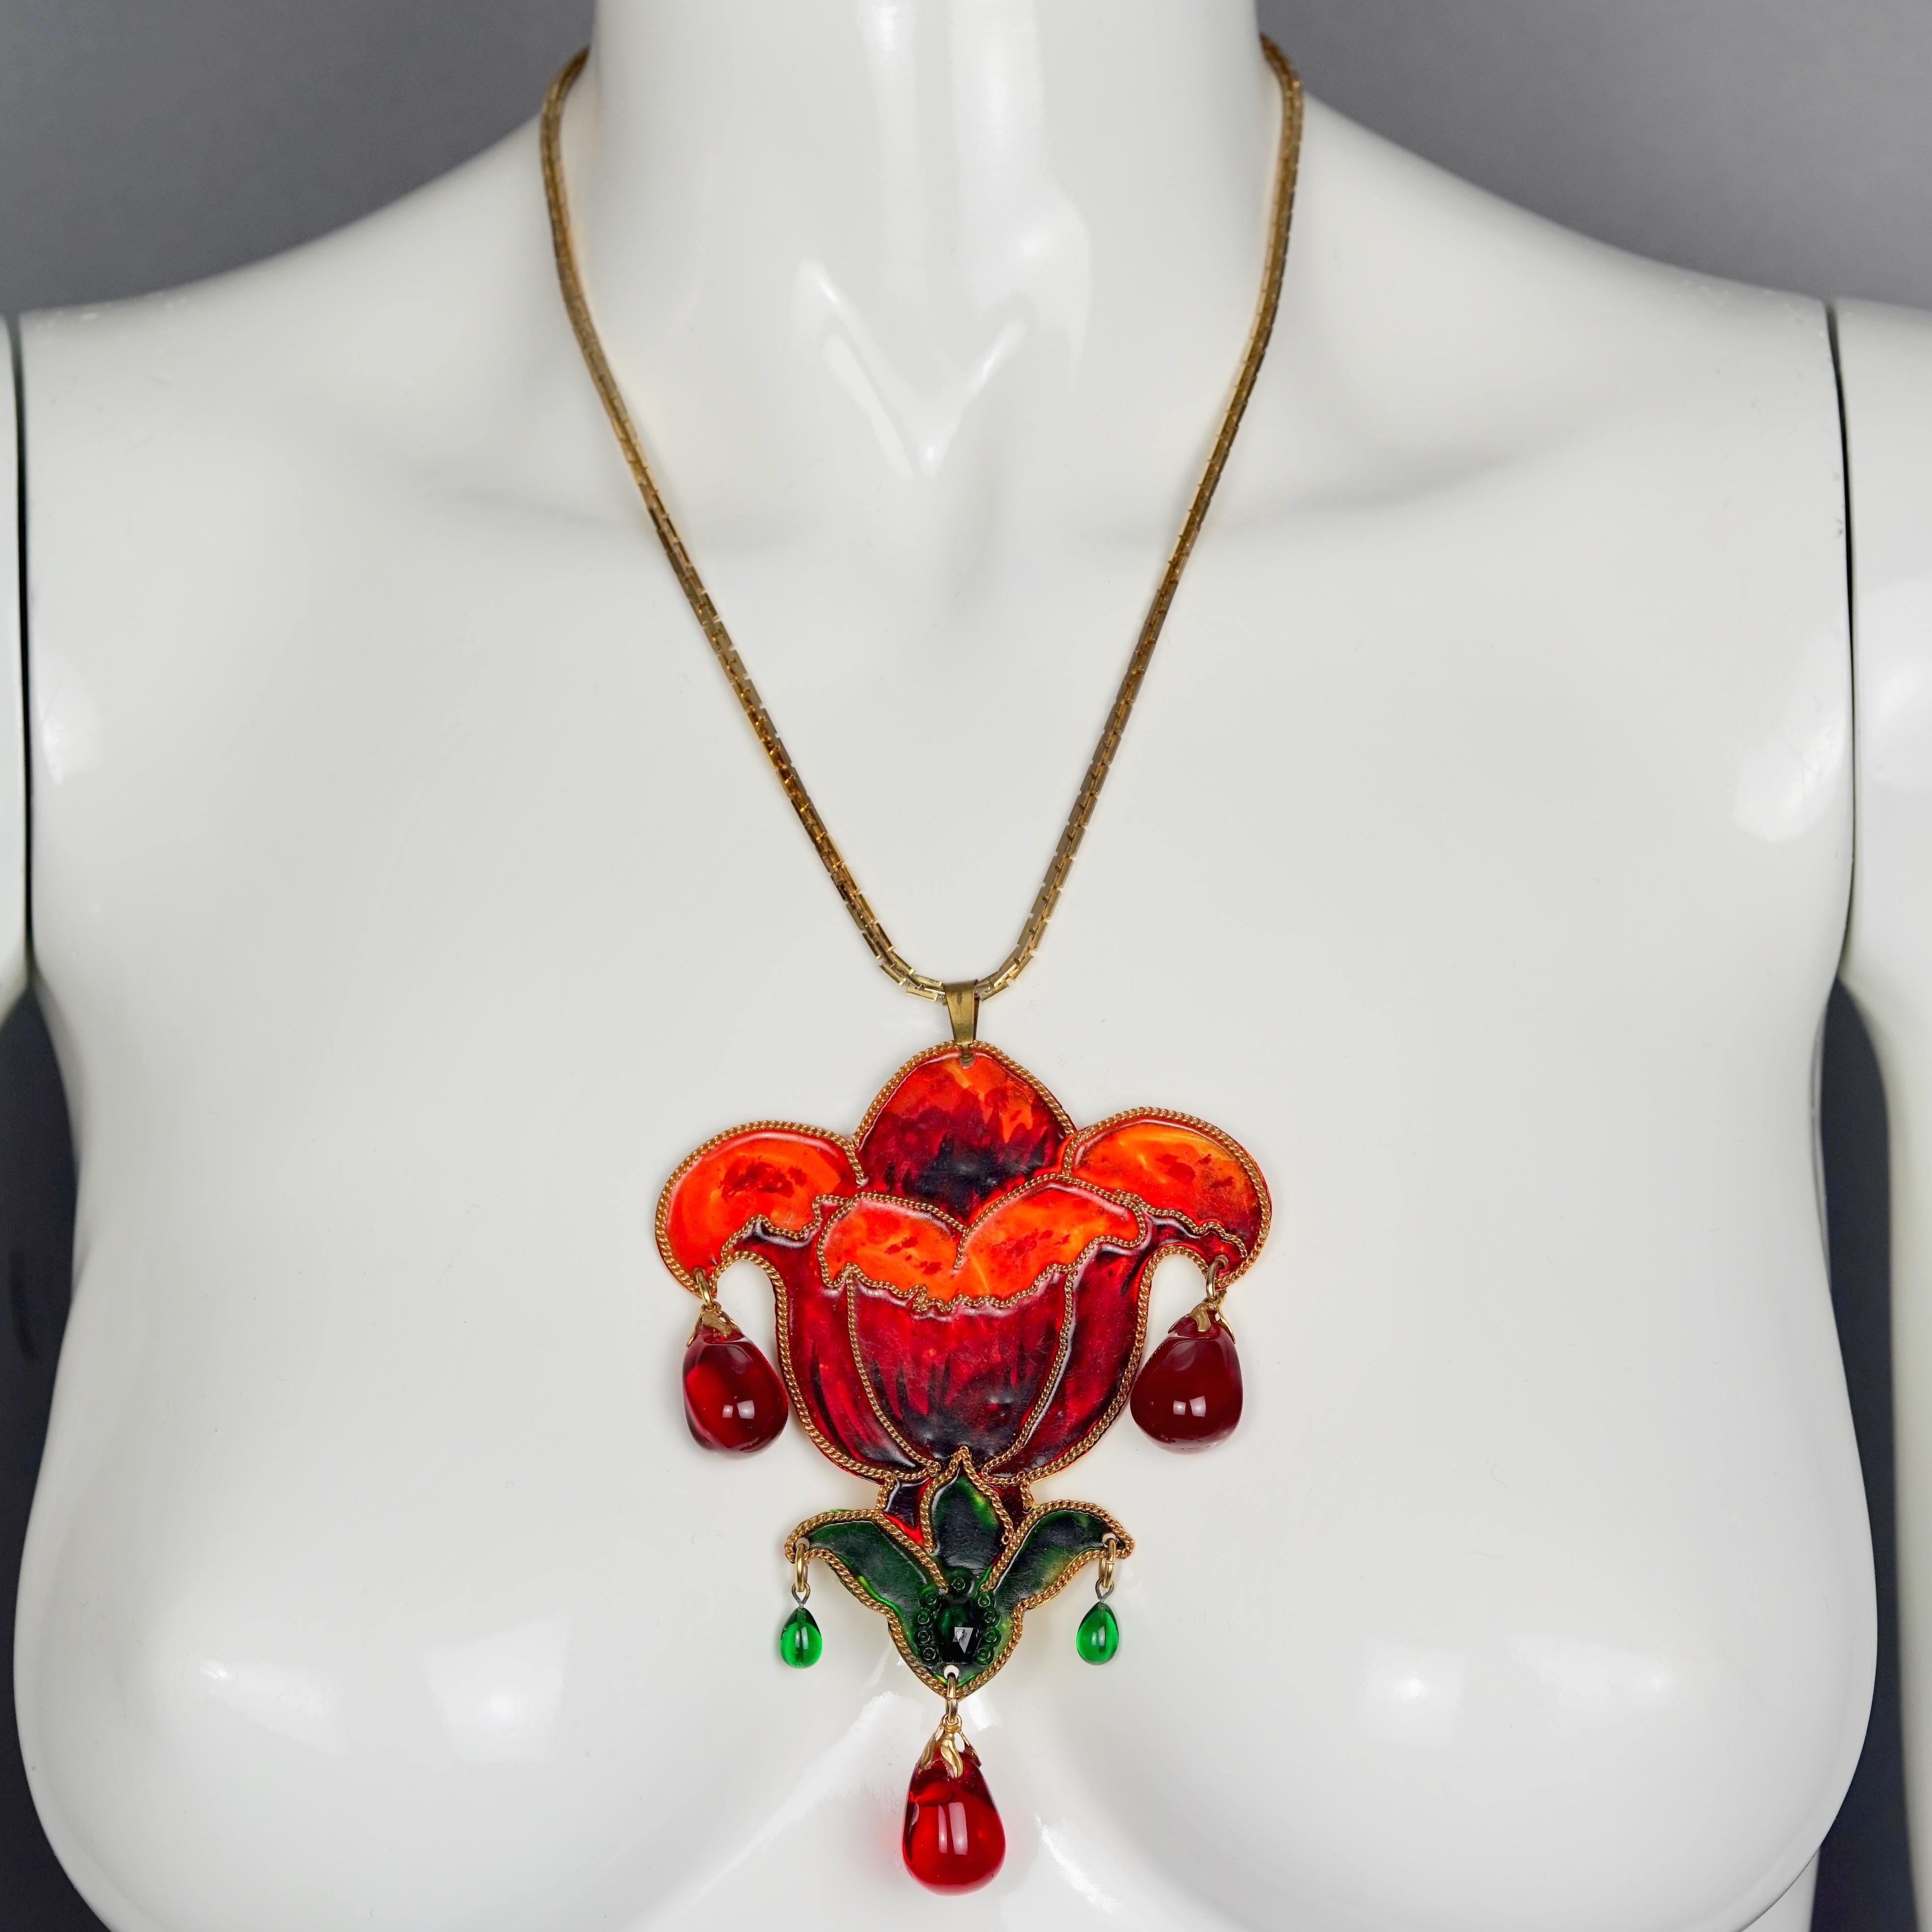 Vintage French Lily Flower Enamel Gripoix Necklace

Measurements:
Height: 4.53 inches (11.5 cm)
Width: 3.35 inches (8.5 cm)
Wearable Length: 20.07 inches (51 cm)

Features:
- Massive lily flower pendant in resin enamel coating embellished with